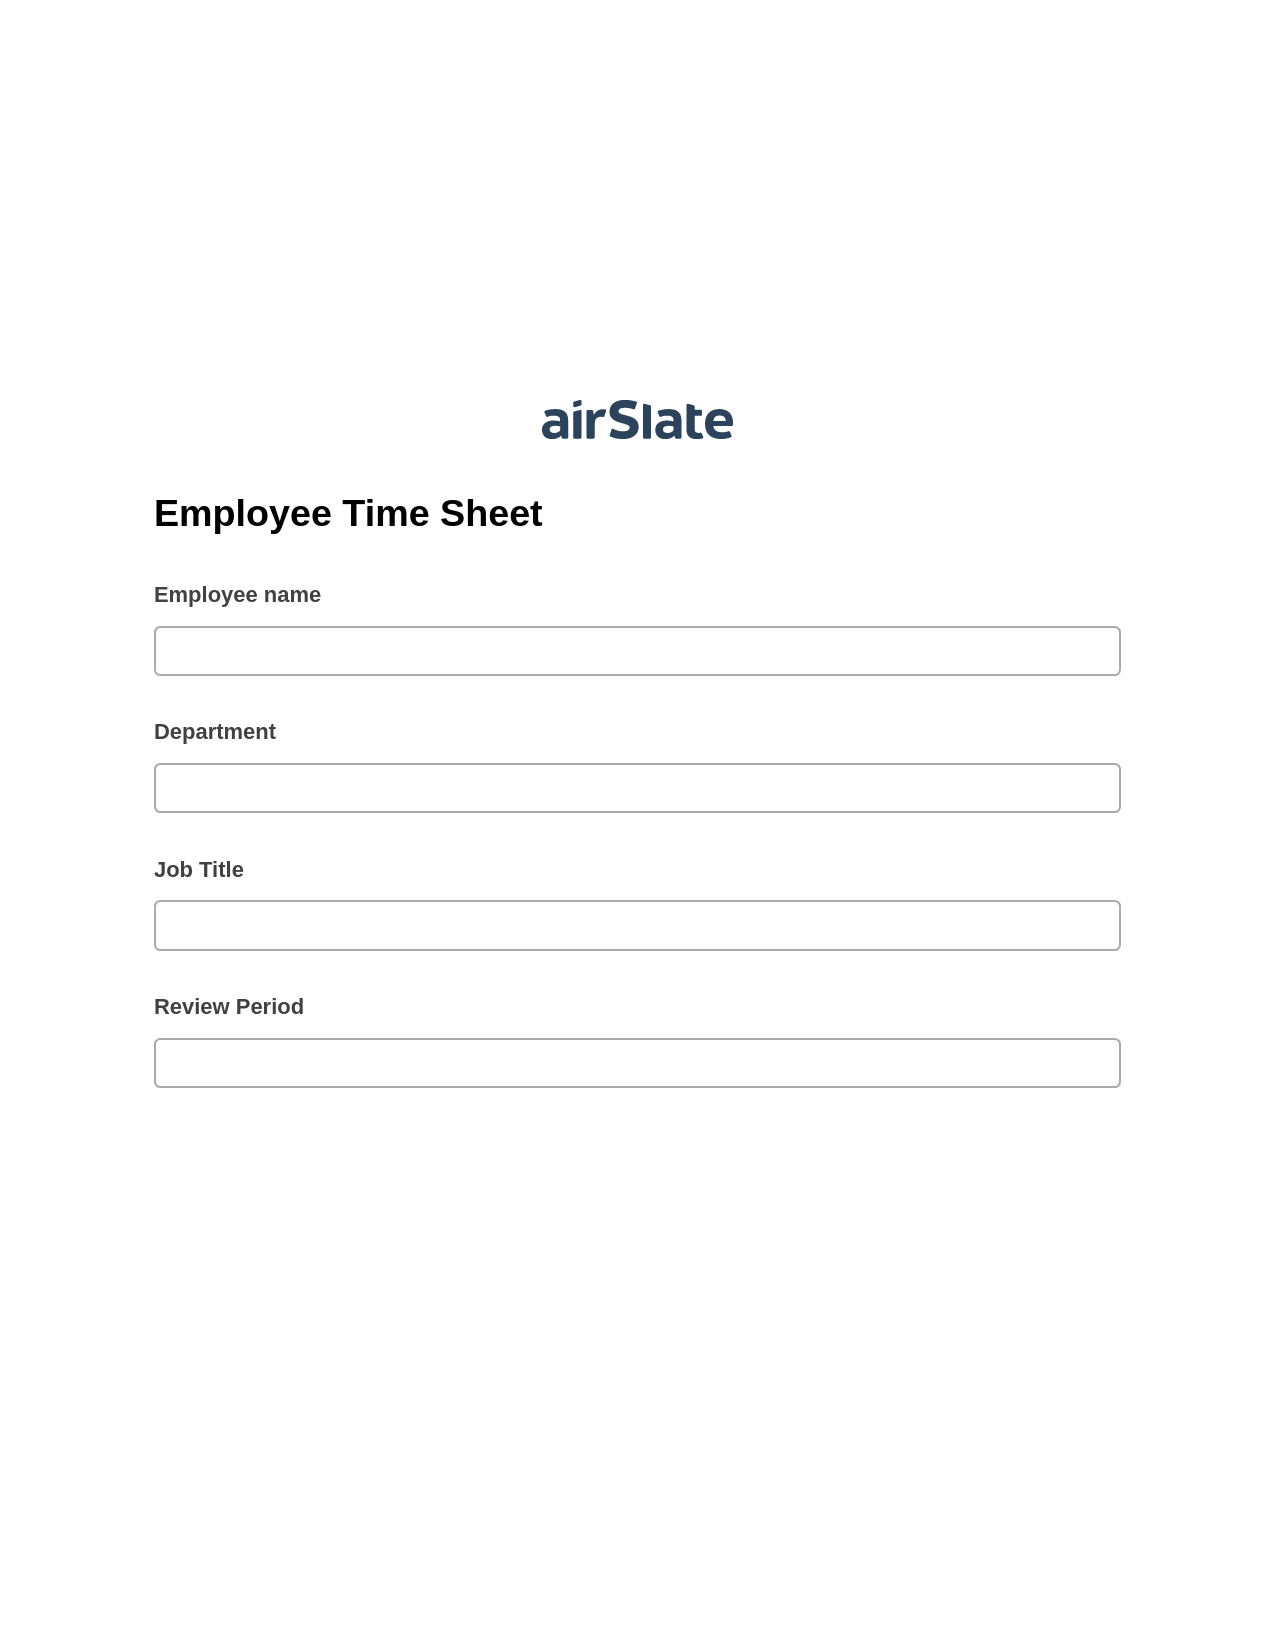 Multirole Employee Time Sheet Pre-fill from Salesforce Records with SOQL Bot, Create Slate every Google Sheet Update Bot, Export to WebMerge Bot